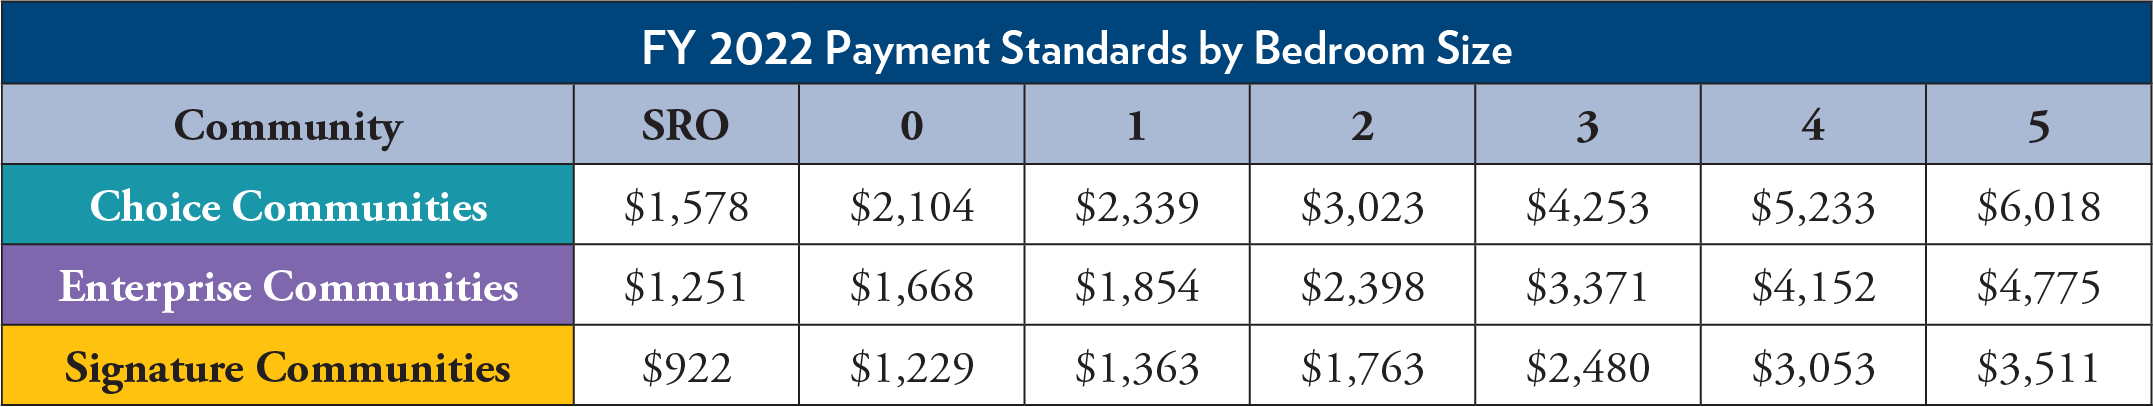 FY 2021 Payment Standards by Bedroom Size